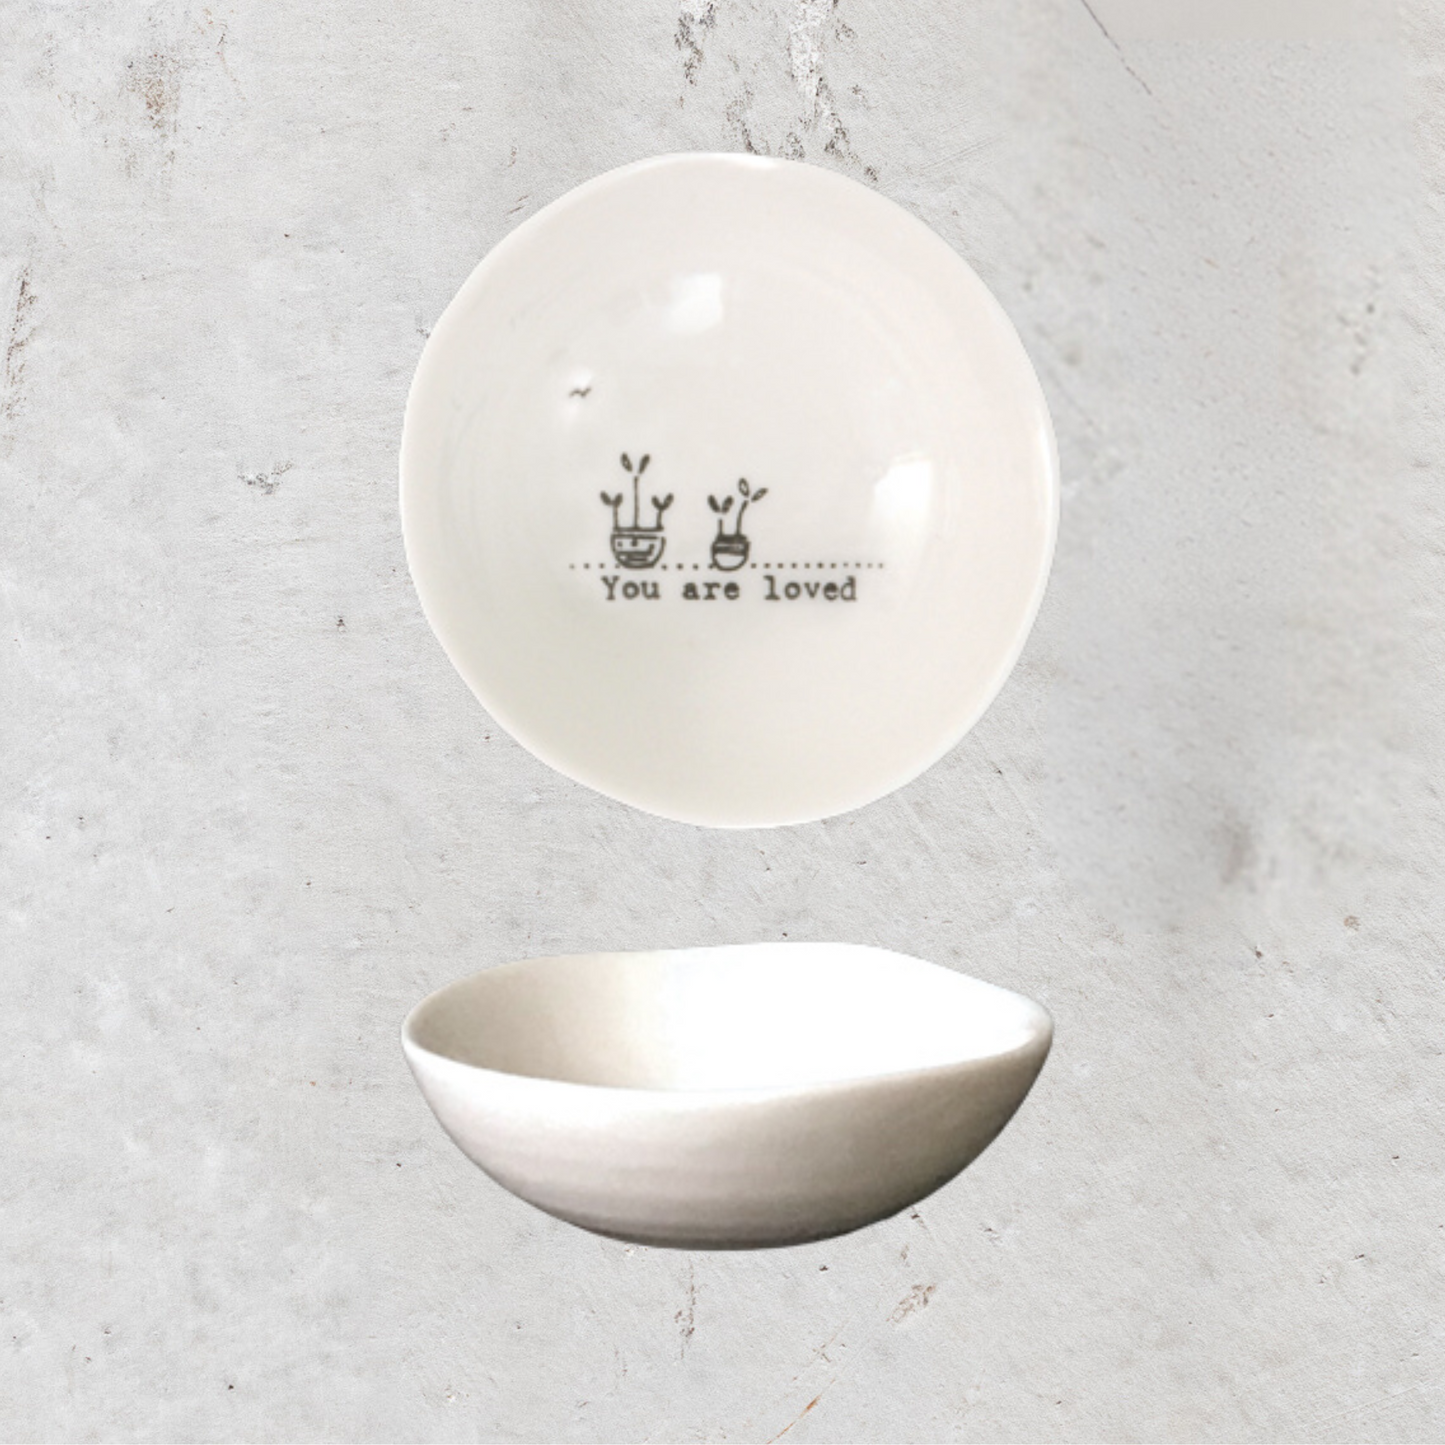 EI6014 sml wobbly bowl you are loved